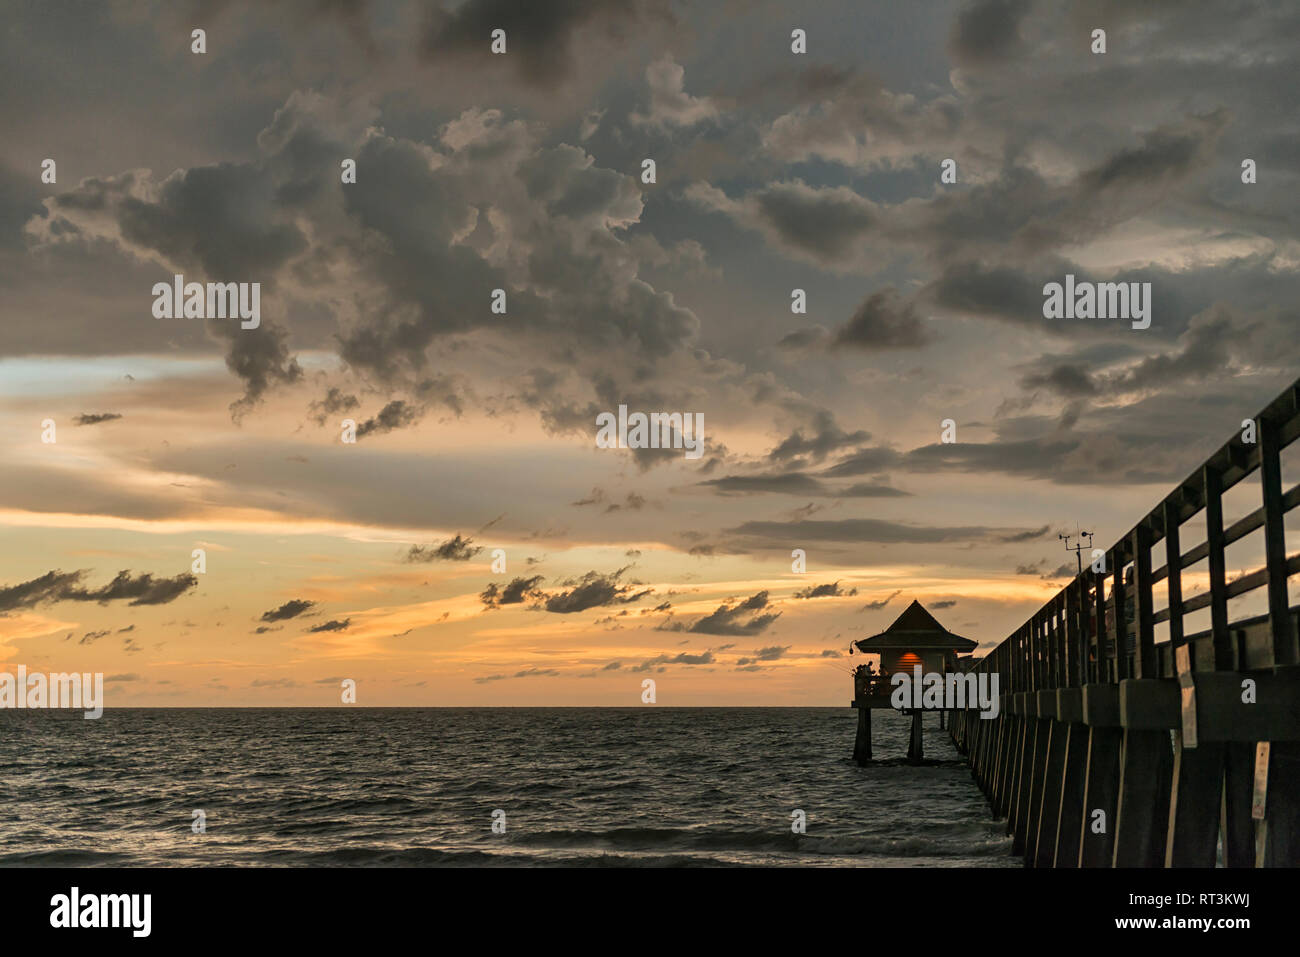 United States of America, Florida, Naples, silhouette of Naples Pier and dark clouds above during dusk Stock Photo